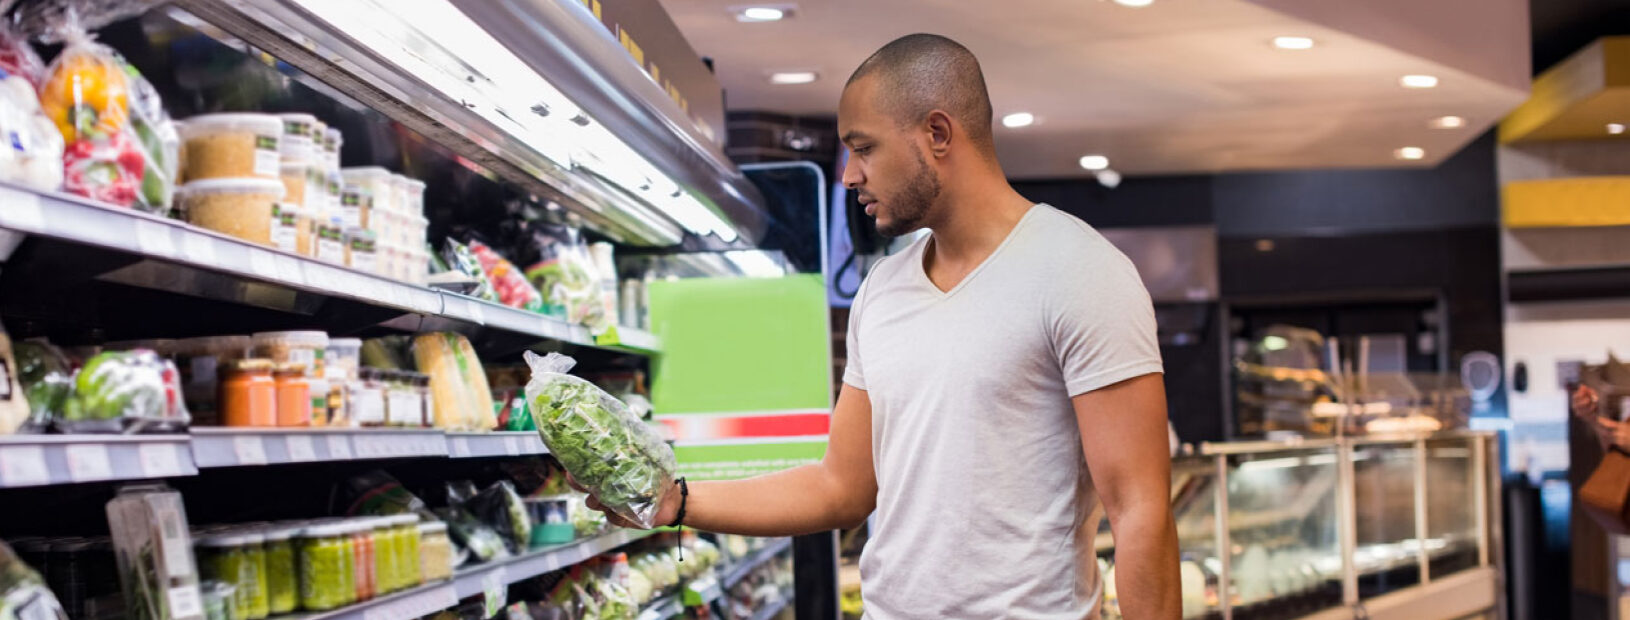 Man at grocery store in gas station holding lettuce